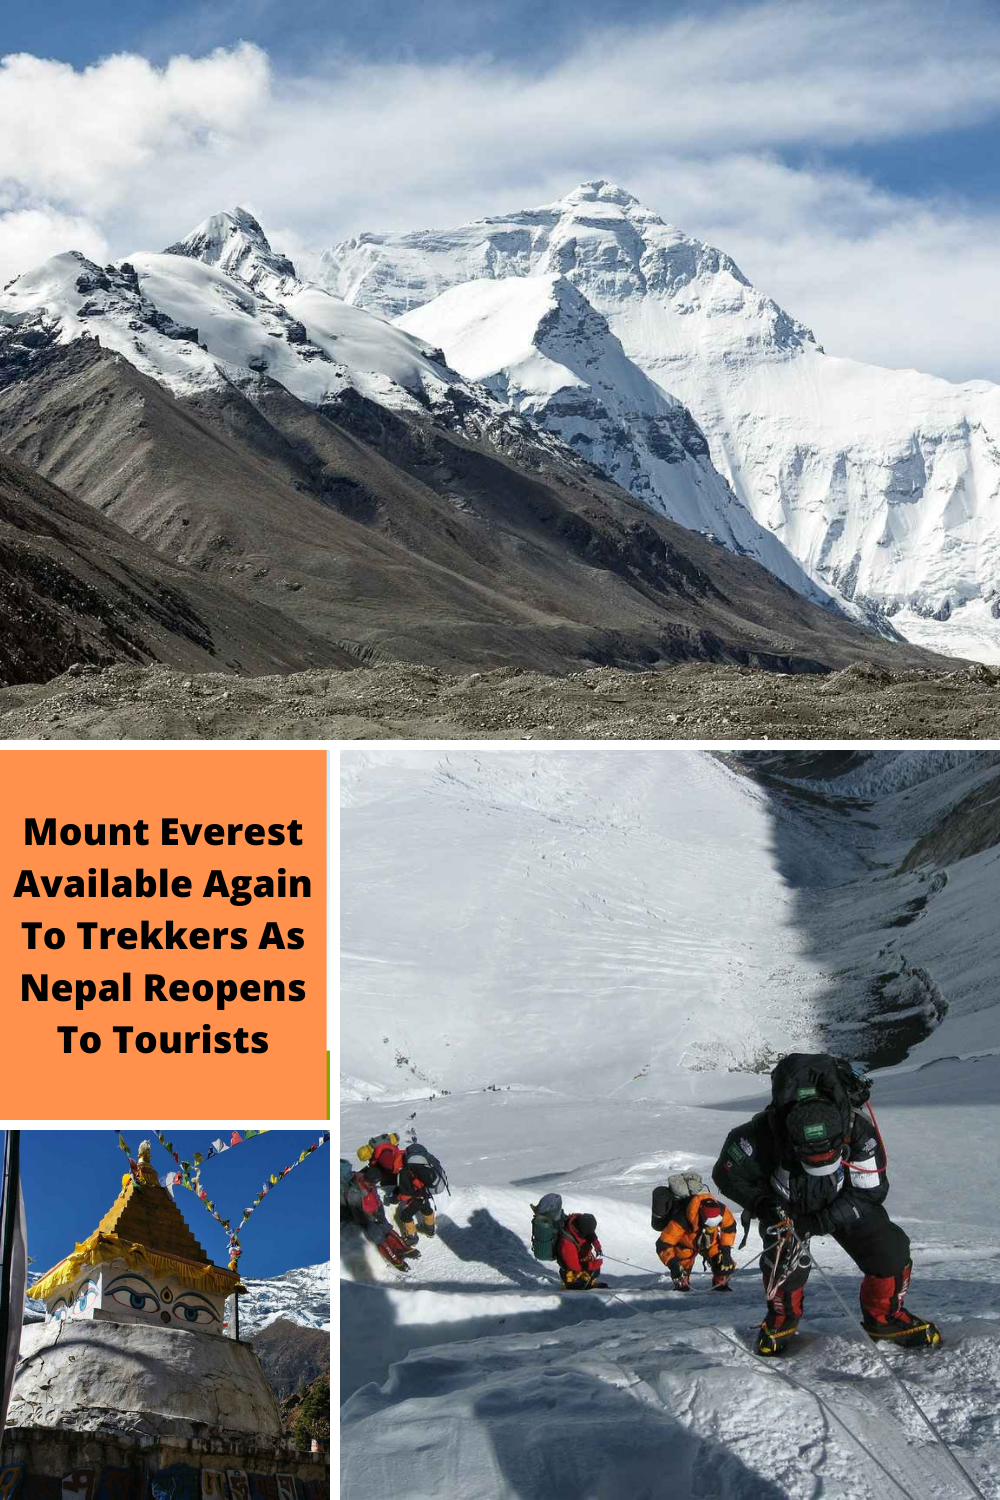 Mount Everest Available Again To Trekkers As Nepal Reopens To Tourists